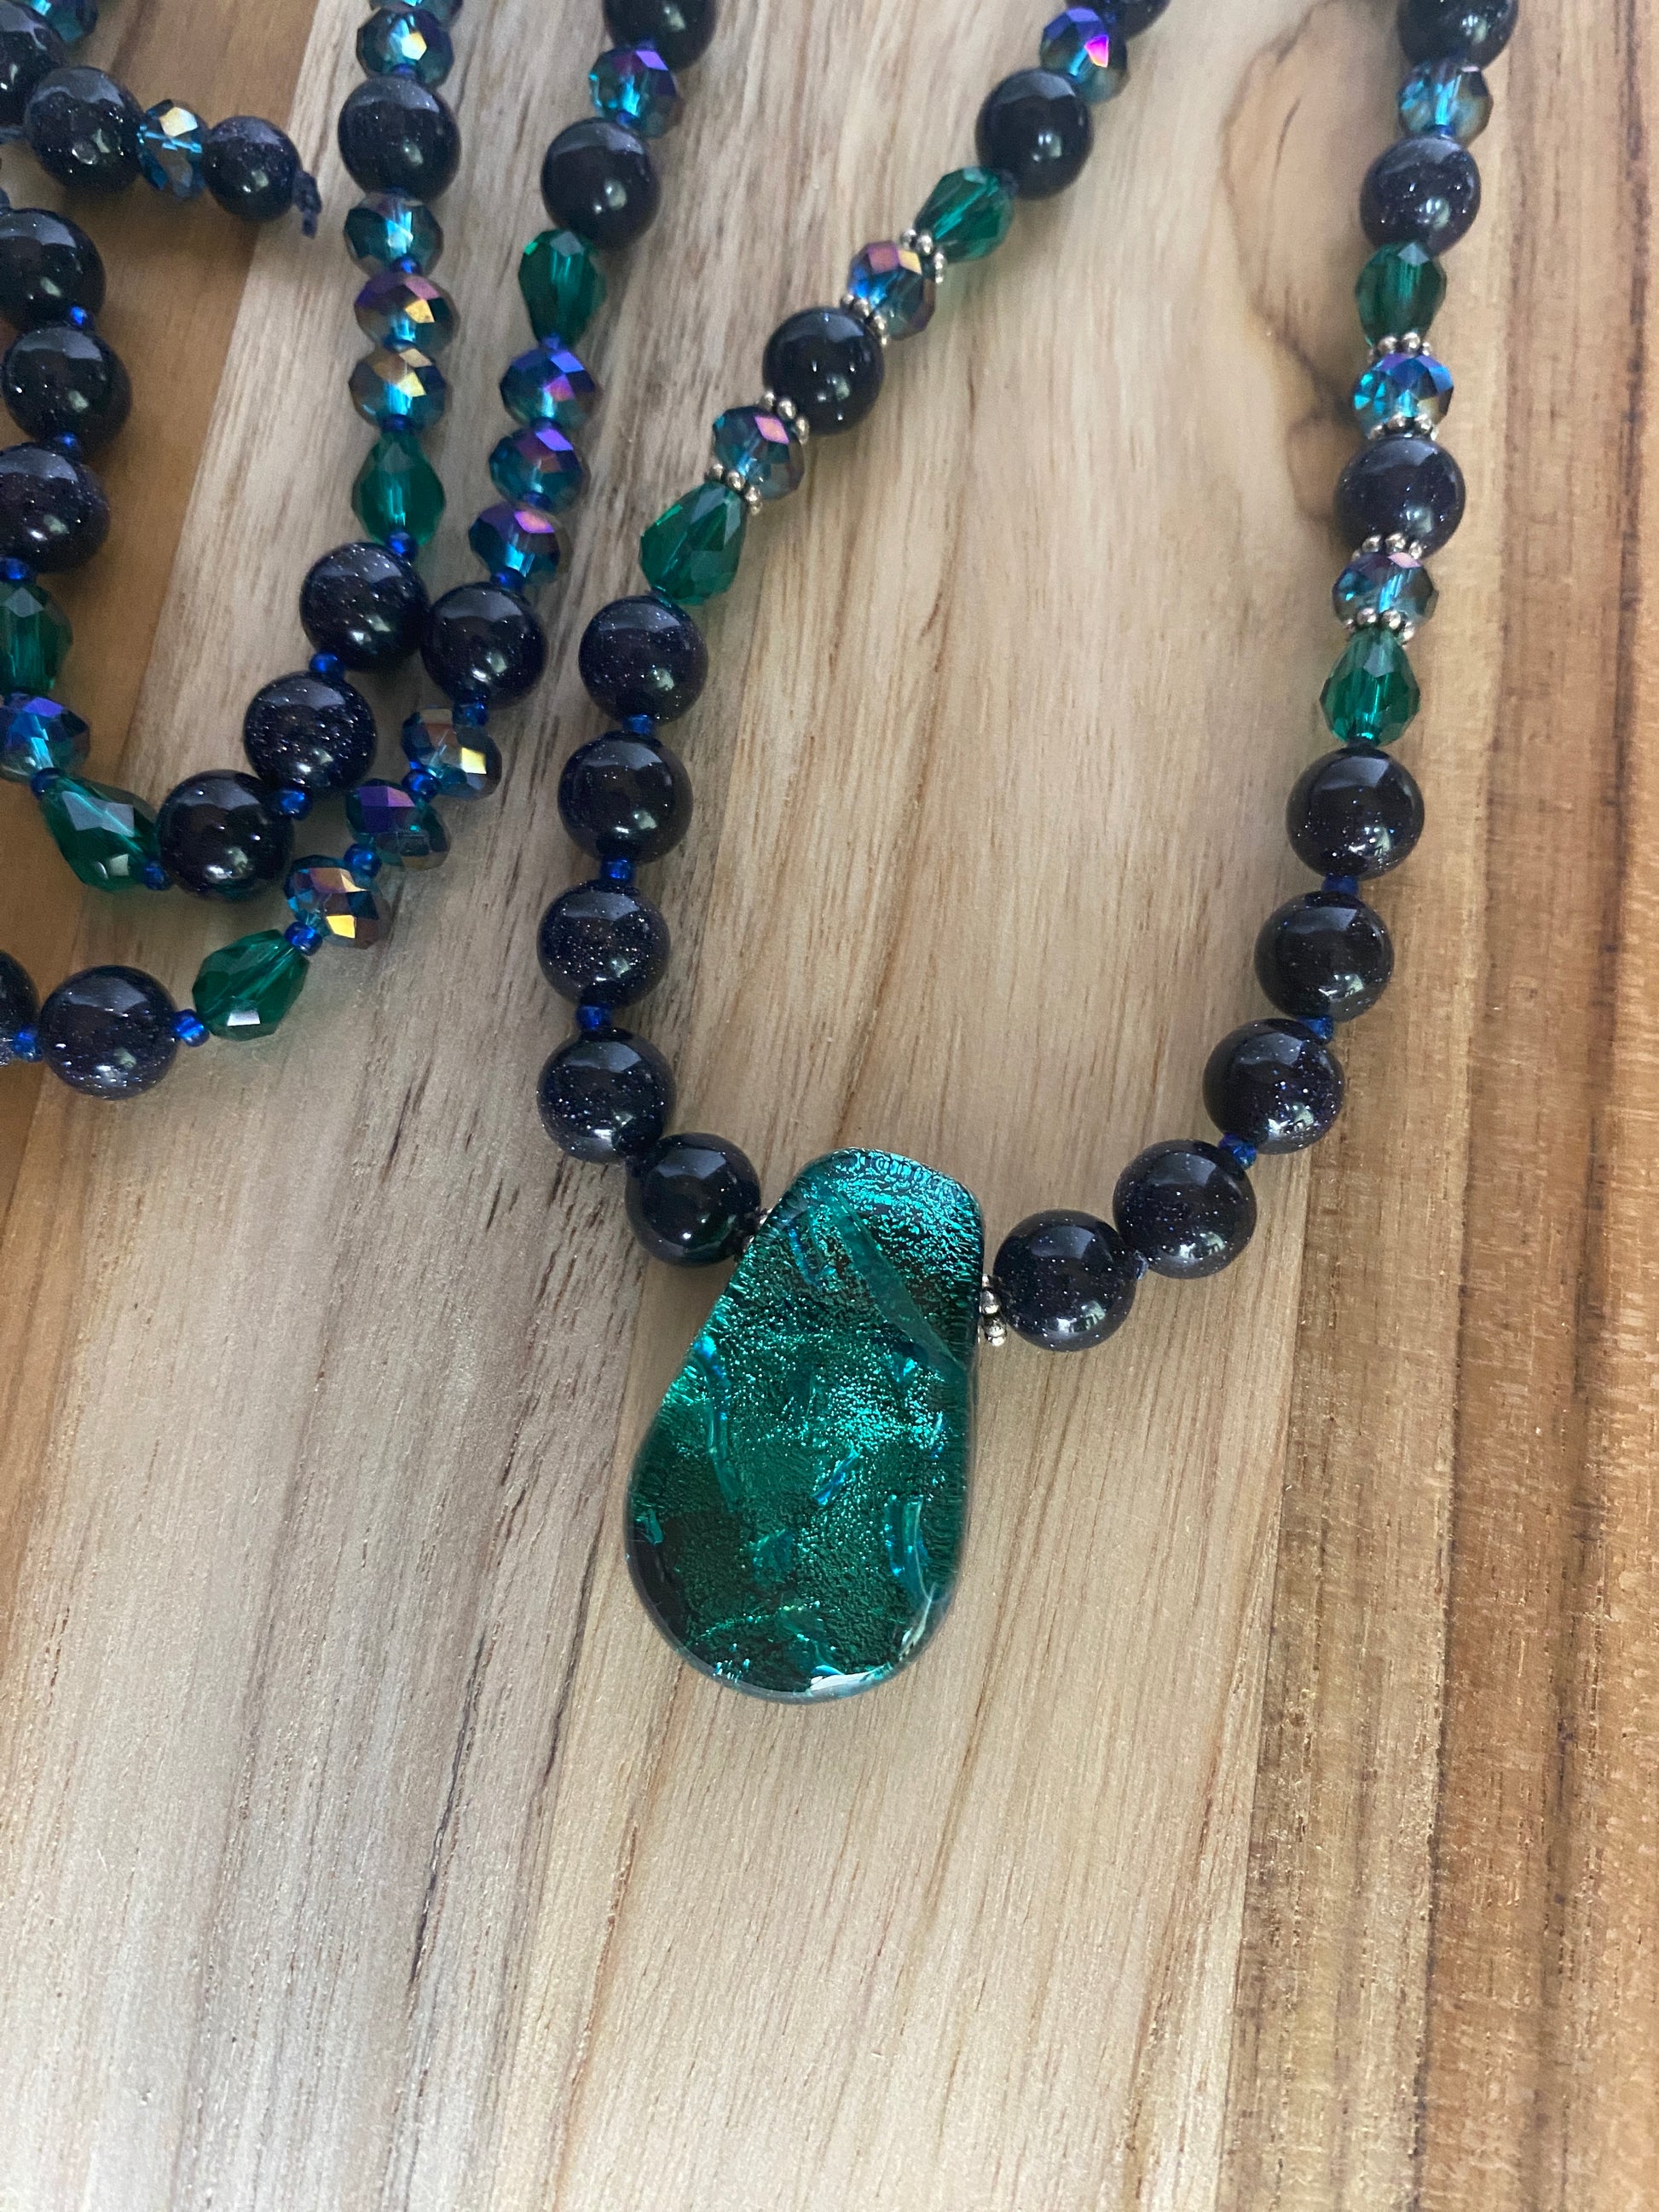 28" Long Emerald Green Dichroic Pendant Necklace with Blue Sandstone & Crystal Beads - My Urban Gems